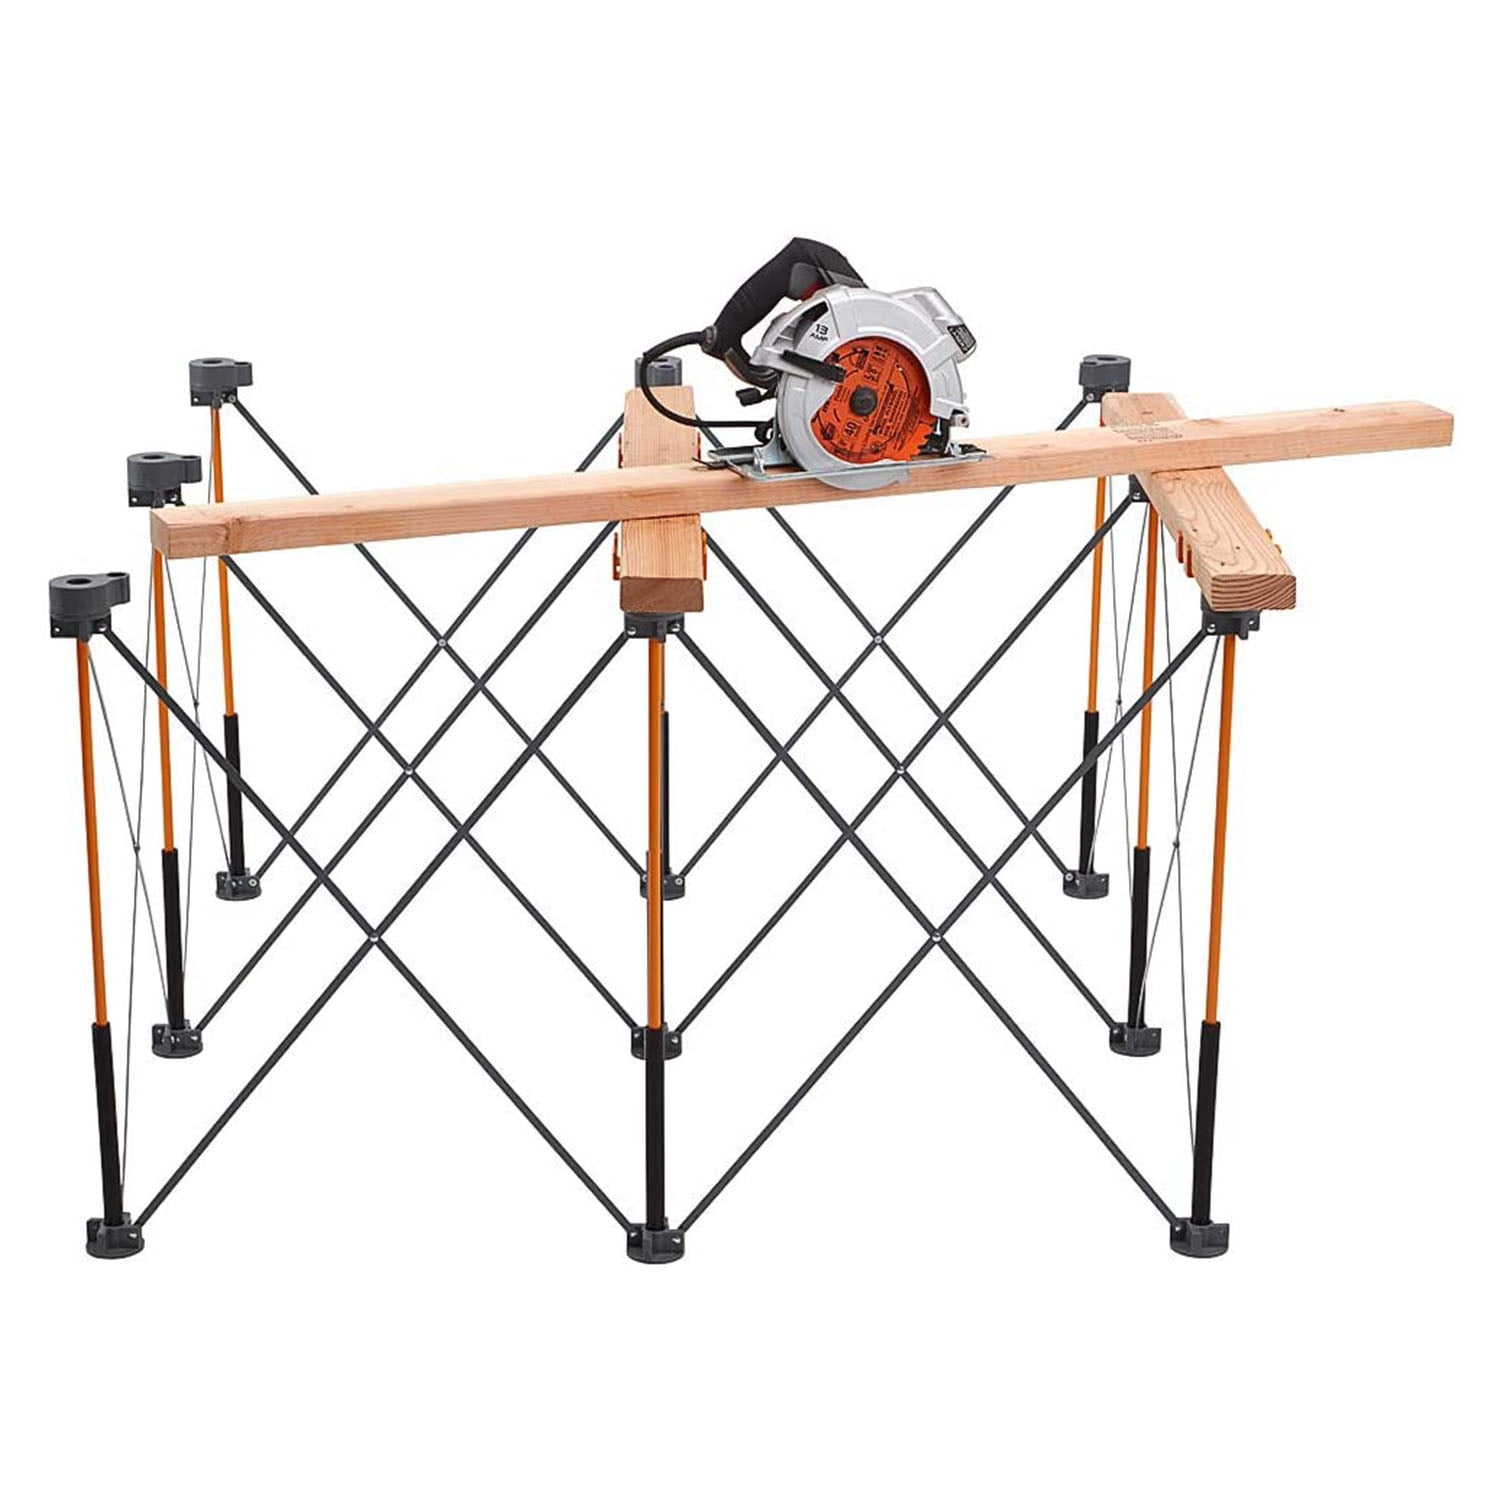 Bora Centipede 4ft x 4ft 9-Strut Work Table Includes 4 X-Cups 4 Quick Clamps 